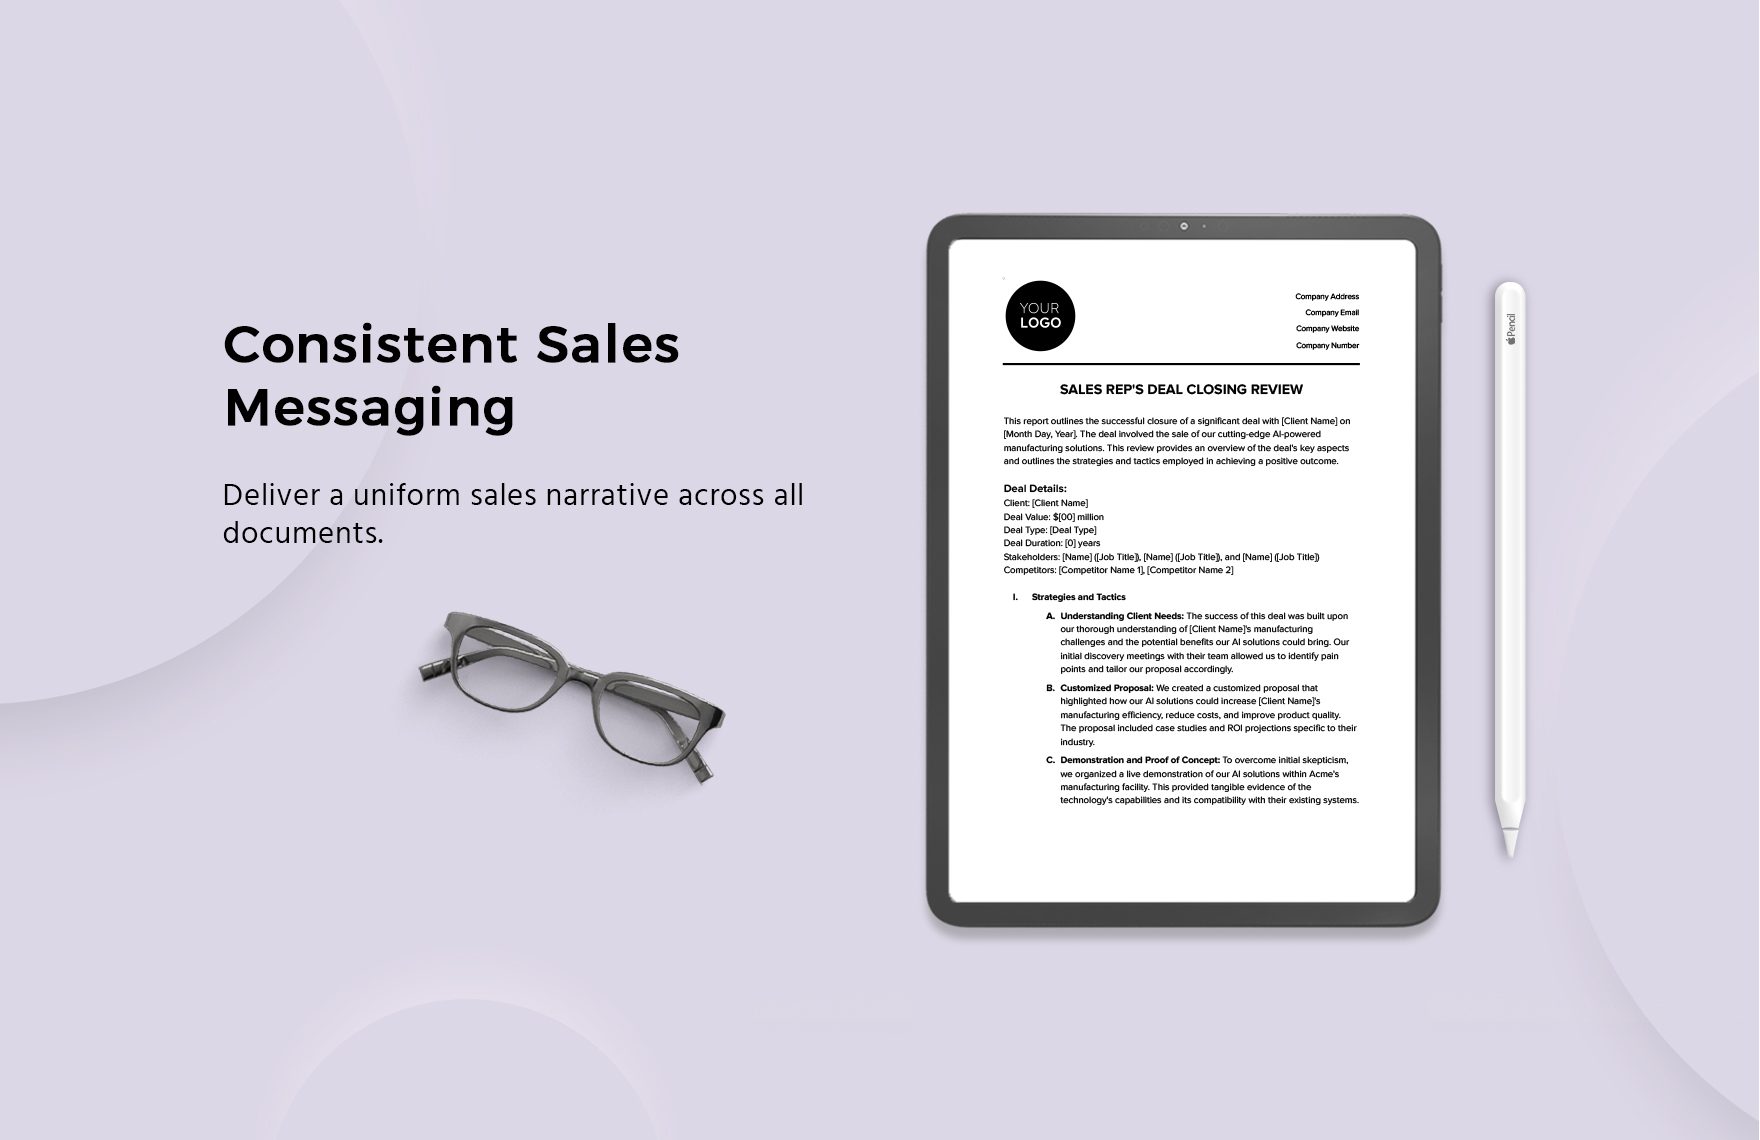 Sales Rep's Deal Closing Review Template